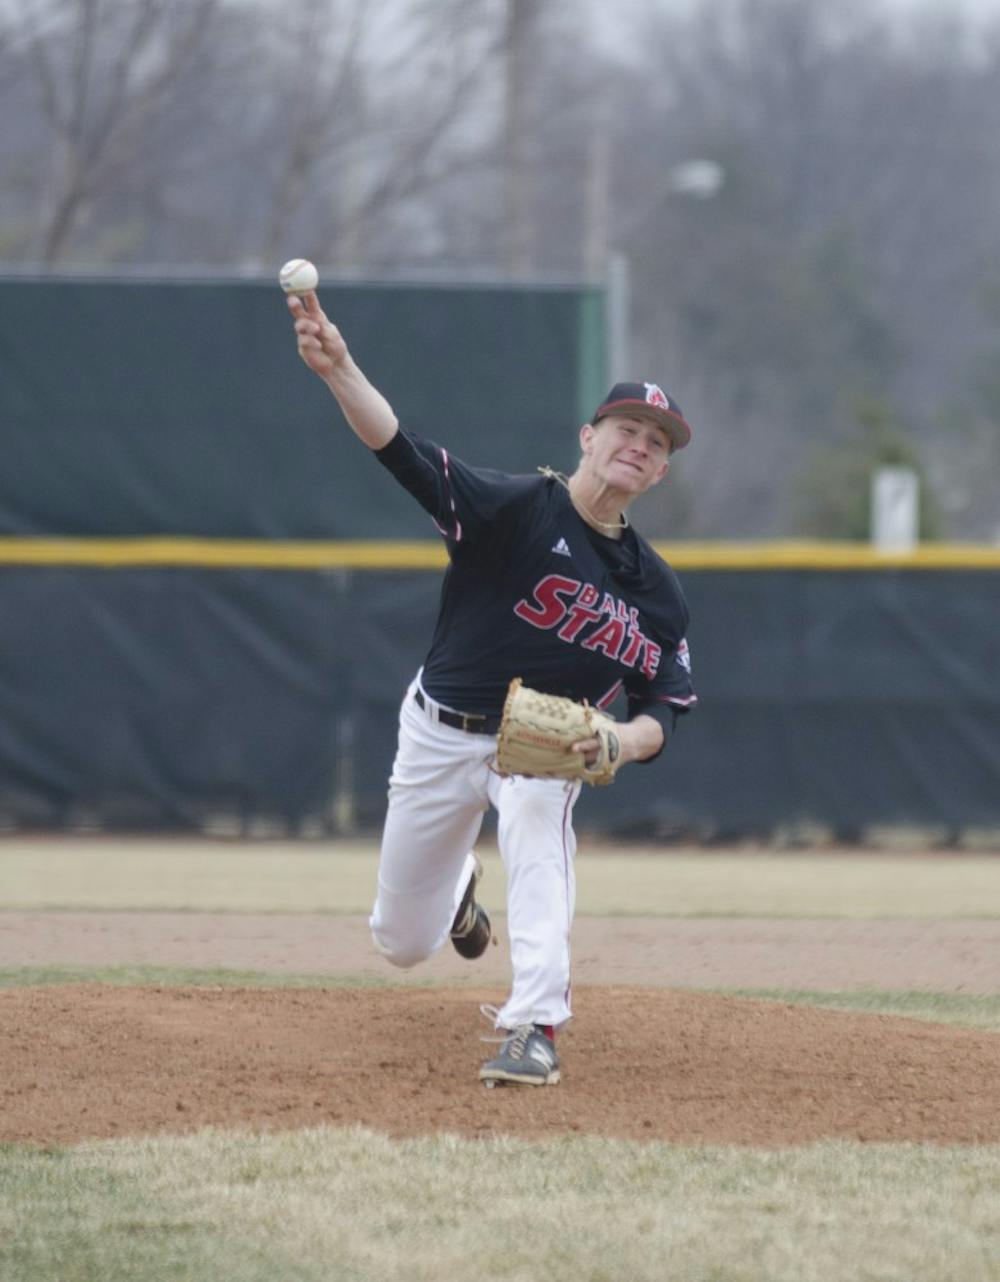 Zach Plesac pitches the ball in the game against Bowling Green on March 22 at Ball Diamond. Plesac was named the National Freshman Pitcher of the Year by the Collegiate Baseball Newspaper. DN FILE PHOTO BREANNA DAUGHERTY 